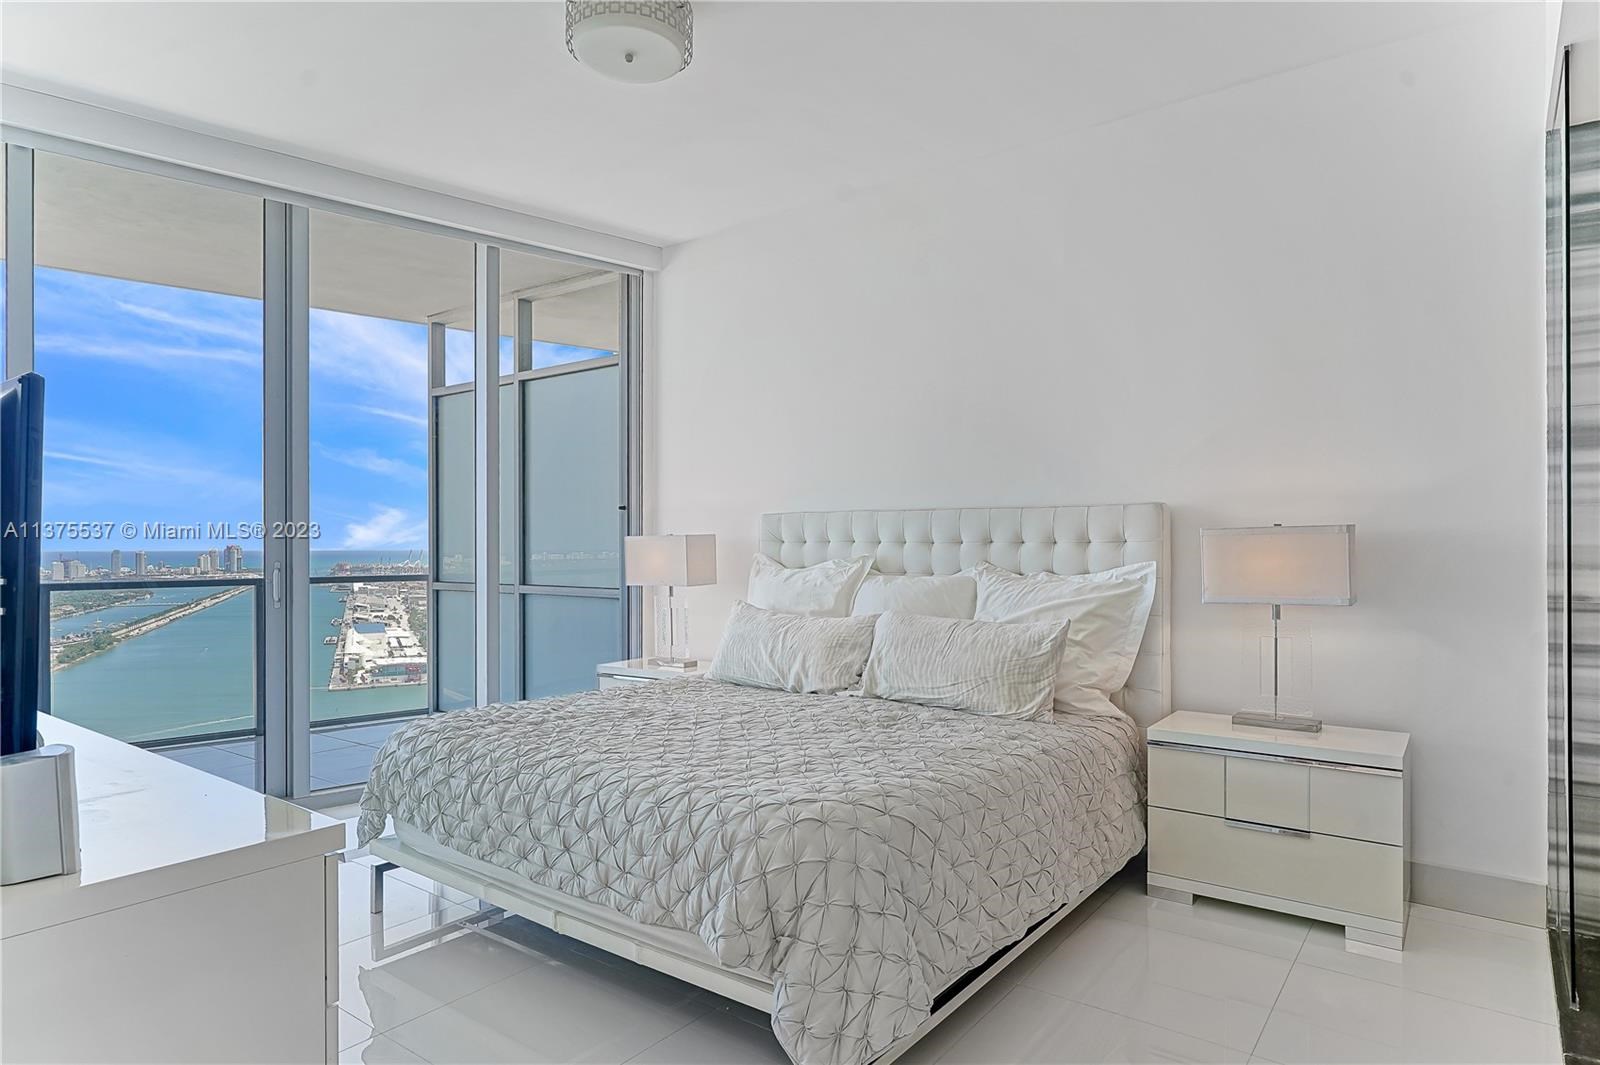 https://www.engelvoelkers.com/images/2ed1e650-87dd-4671-920b-705e70efab3b/apartment-in-miami-florida